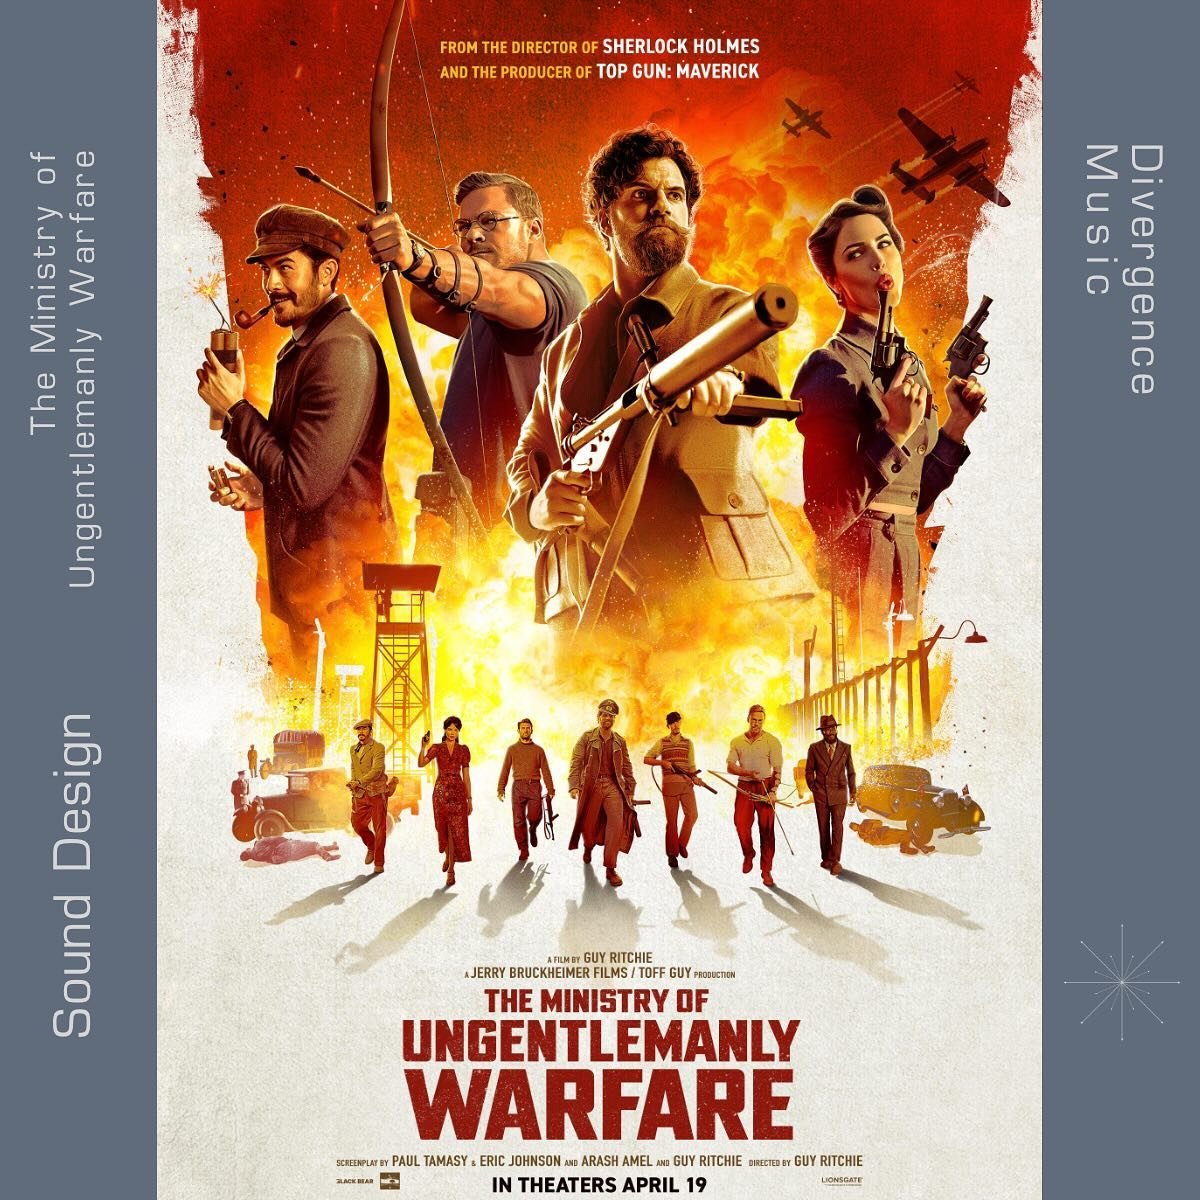 Check out sound design from our DVices and Action Cadences series&rsquo; in the @ungentlemanlywarfare campaign.

Thanks to @lionsgate for working with us on this one!